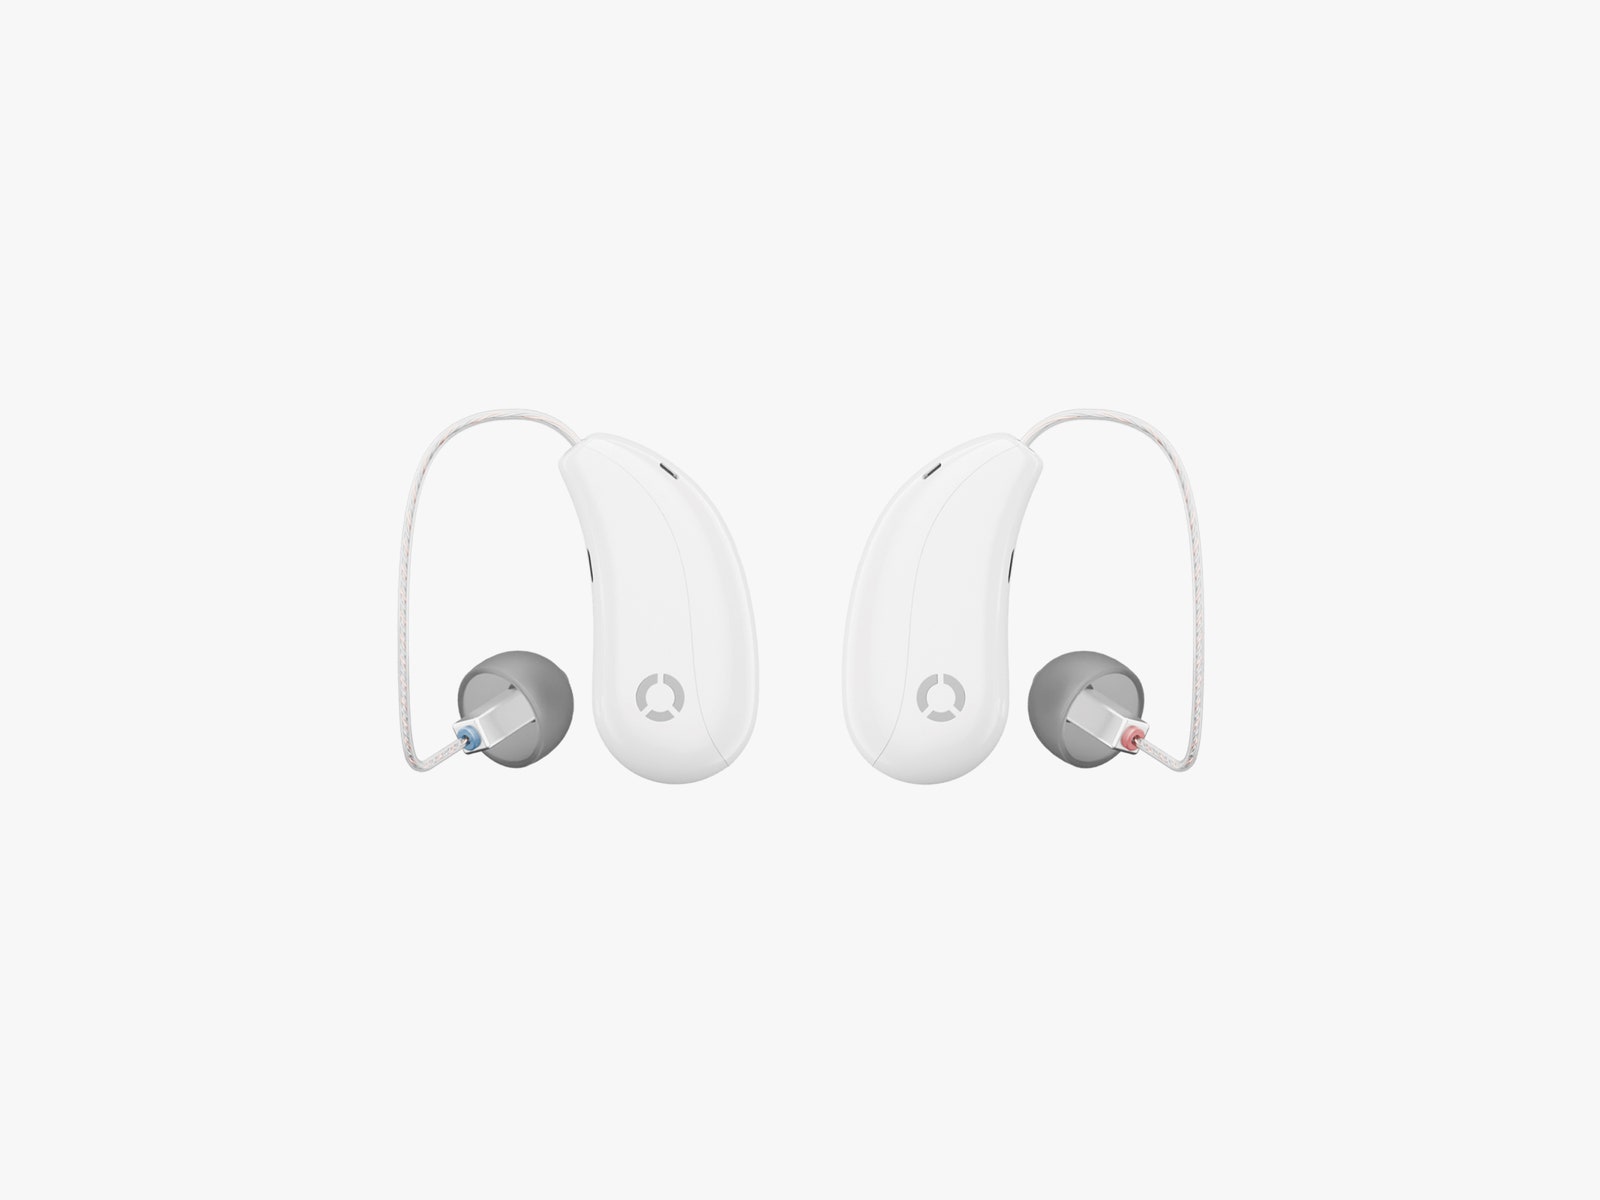 Two side by side white overtheear hearing aids with grey ear canal cushions